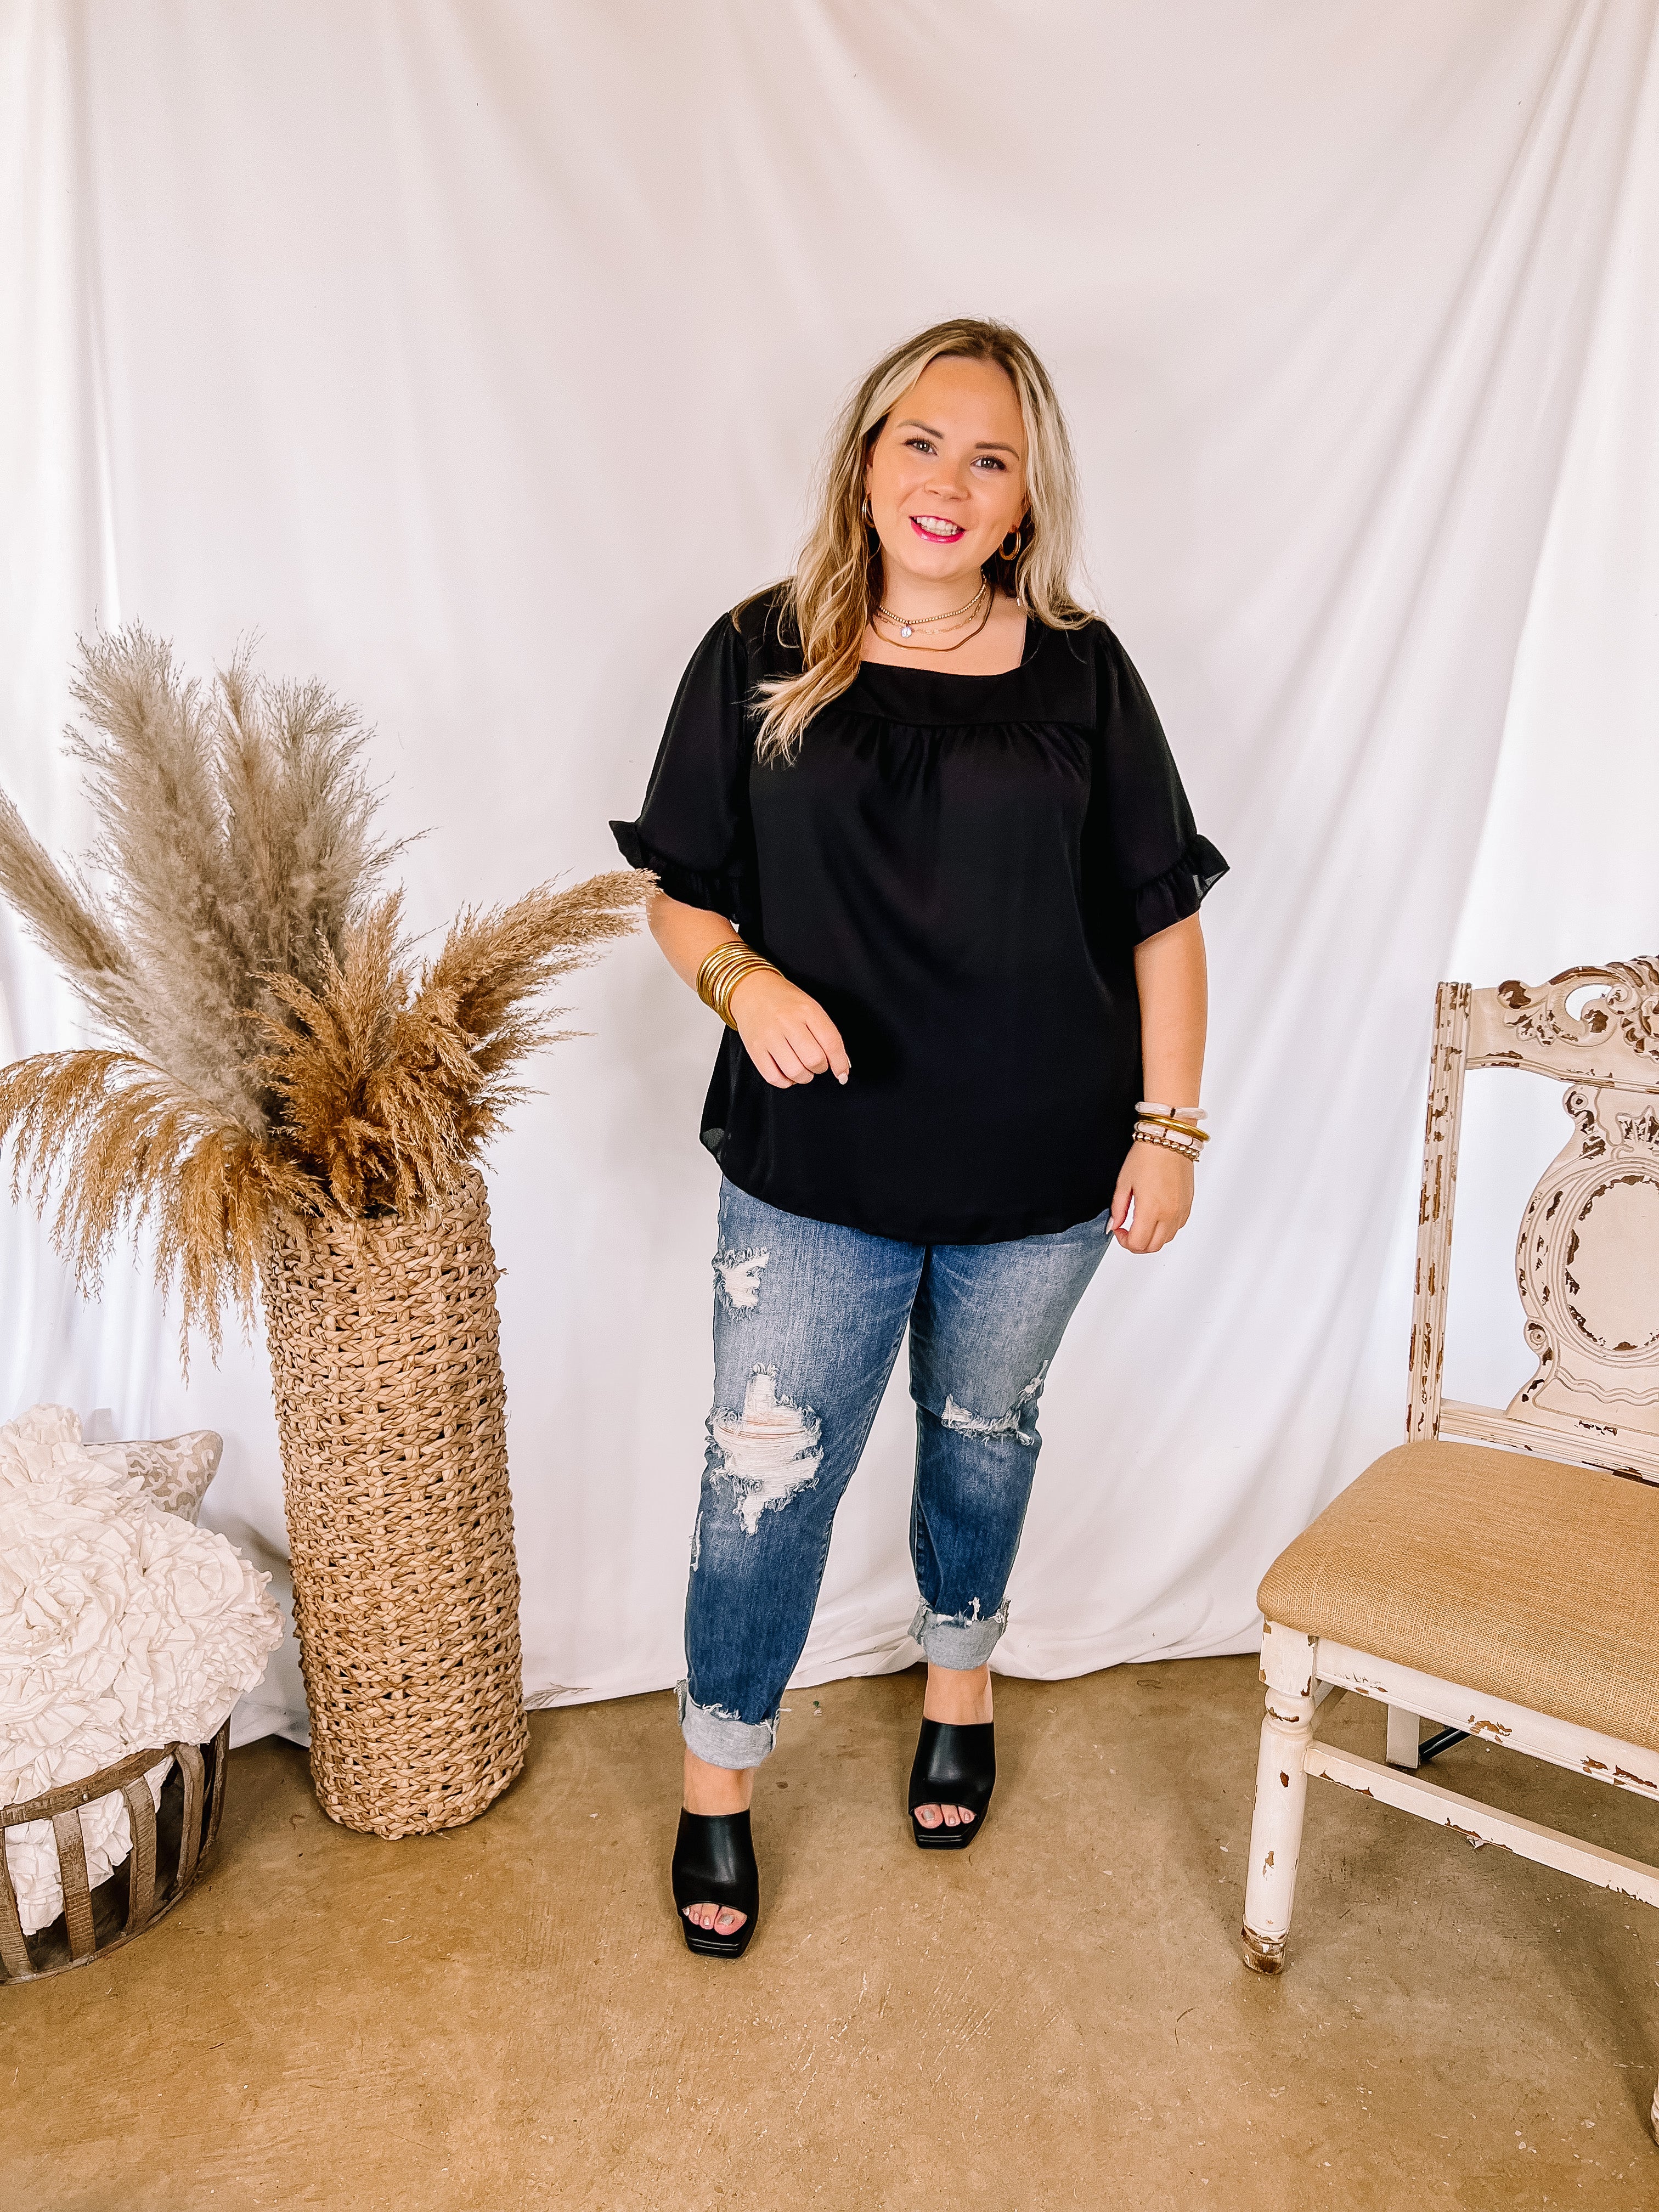 New Best Friend Square Neck Ruffle Short Sleeve Top in Black - Giddy Up Glamour Boutique